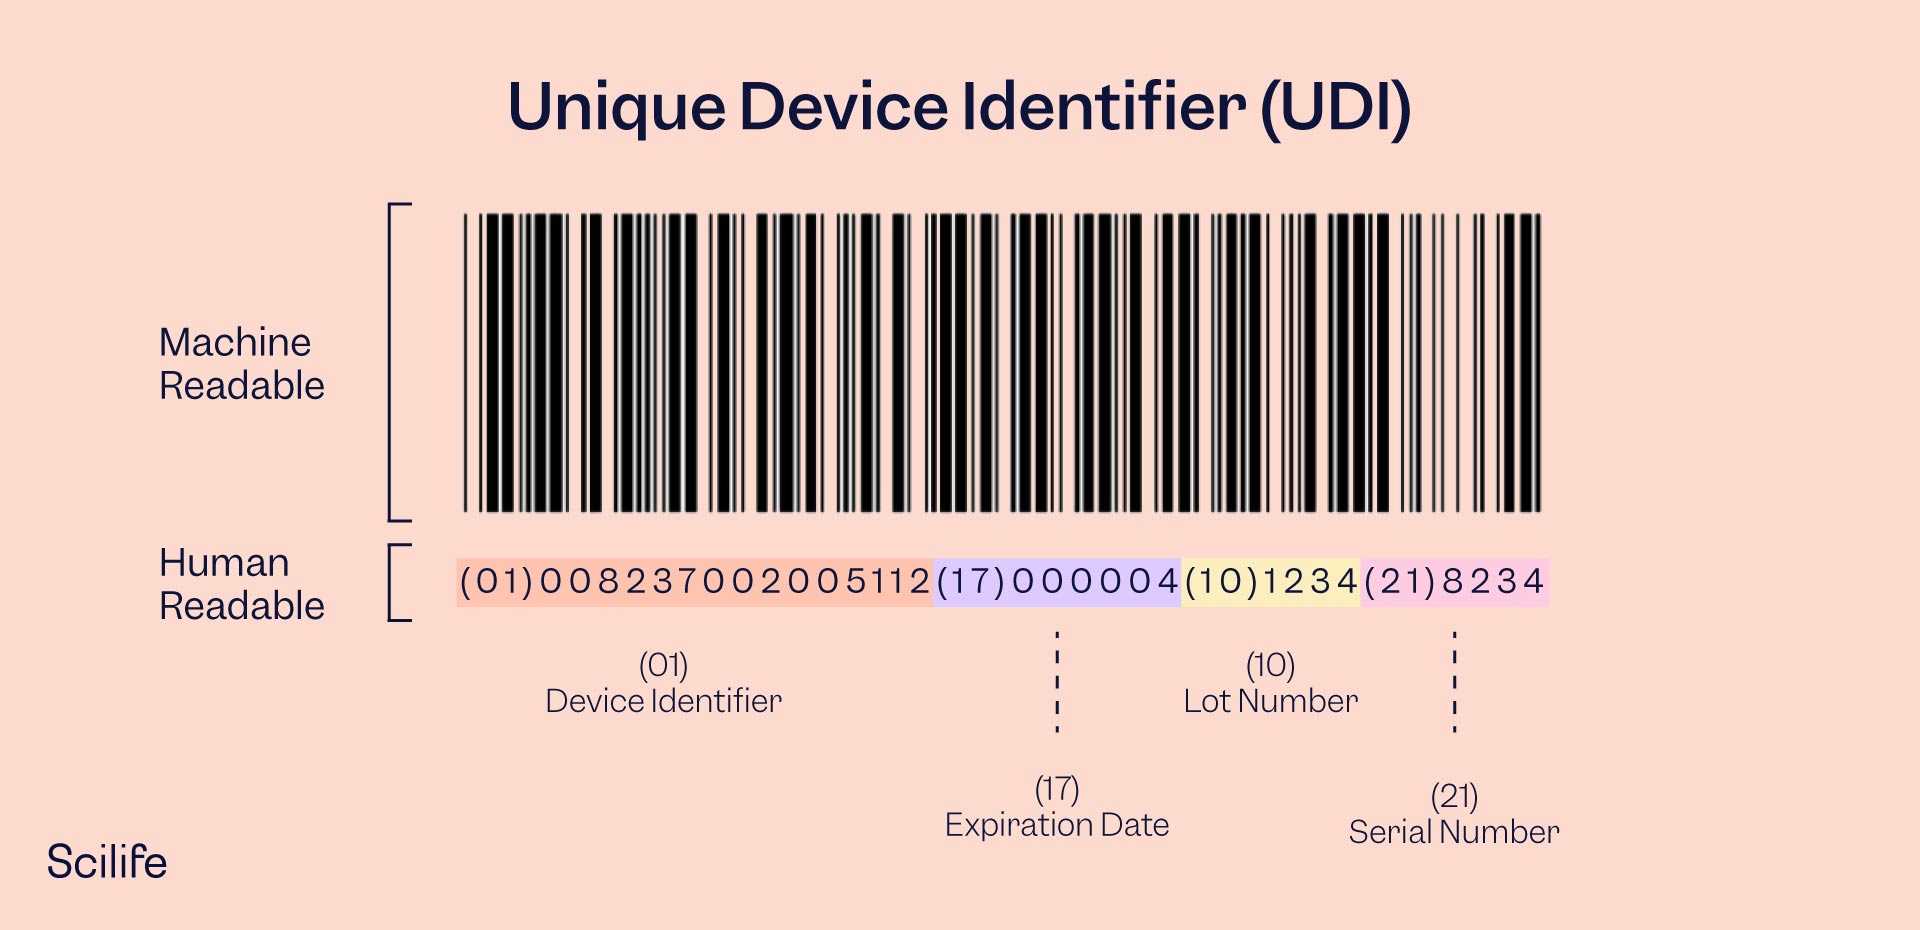 Unique Device Identifier example by Scilife